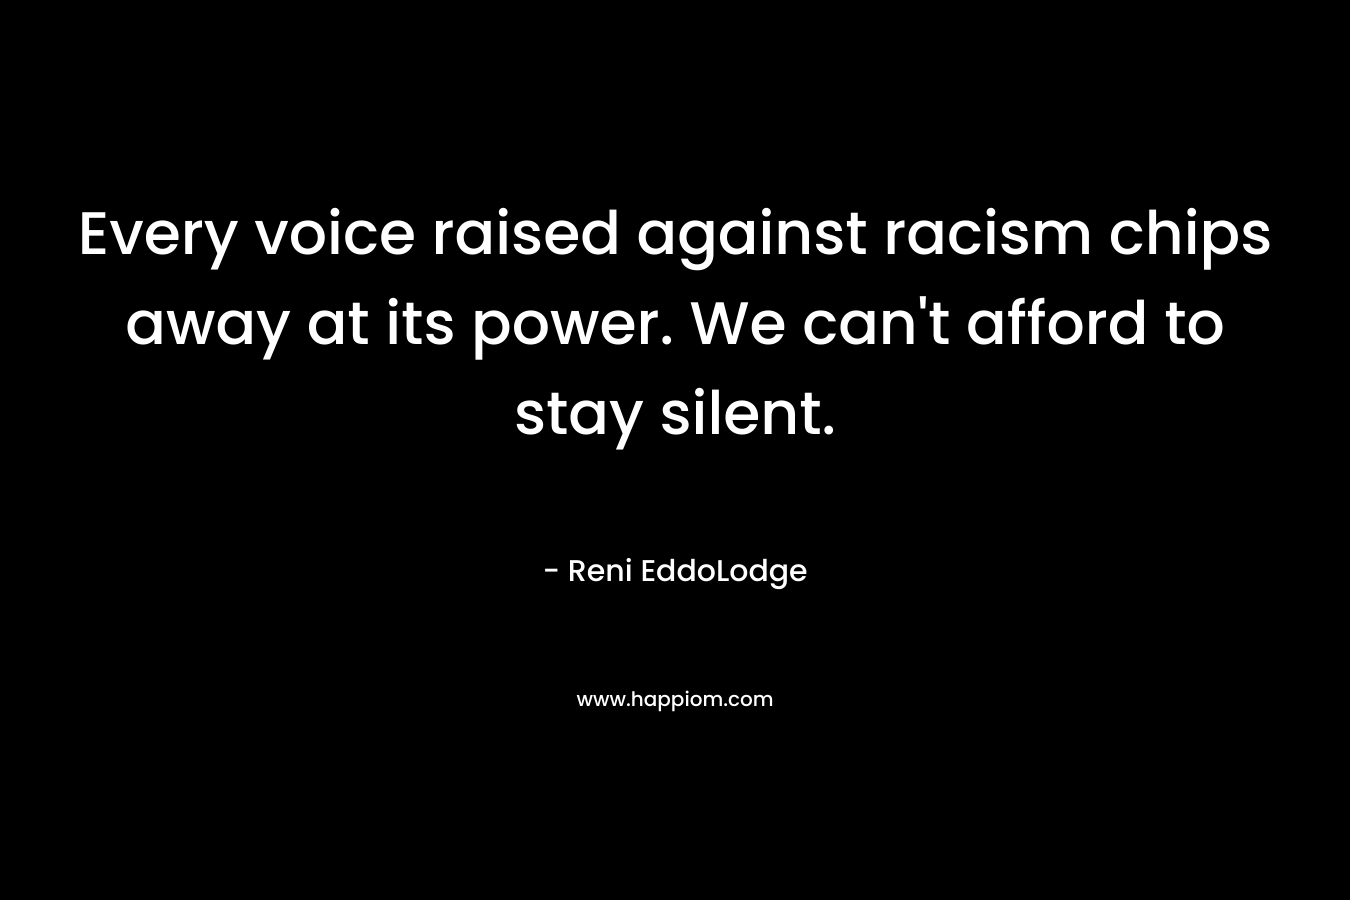 Every voice raised against racism chips away at its power. We can’t afford to stay silent. – Reni EddoLodge